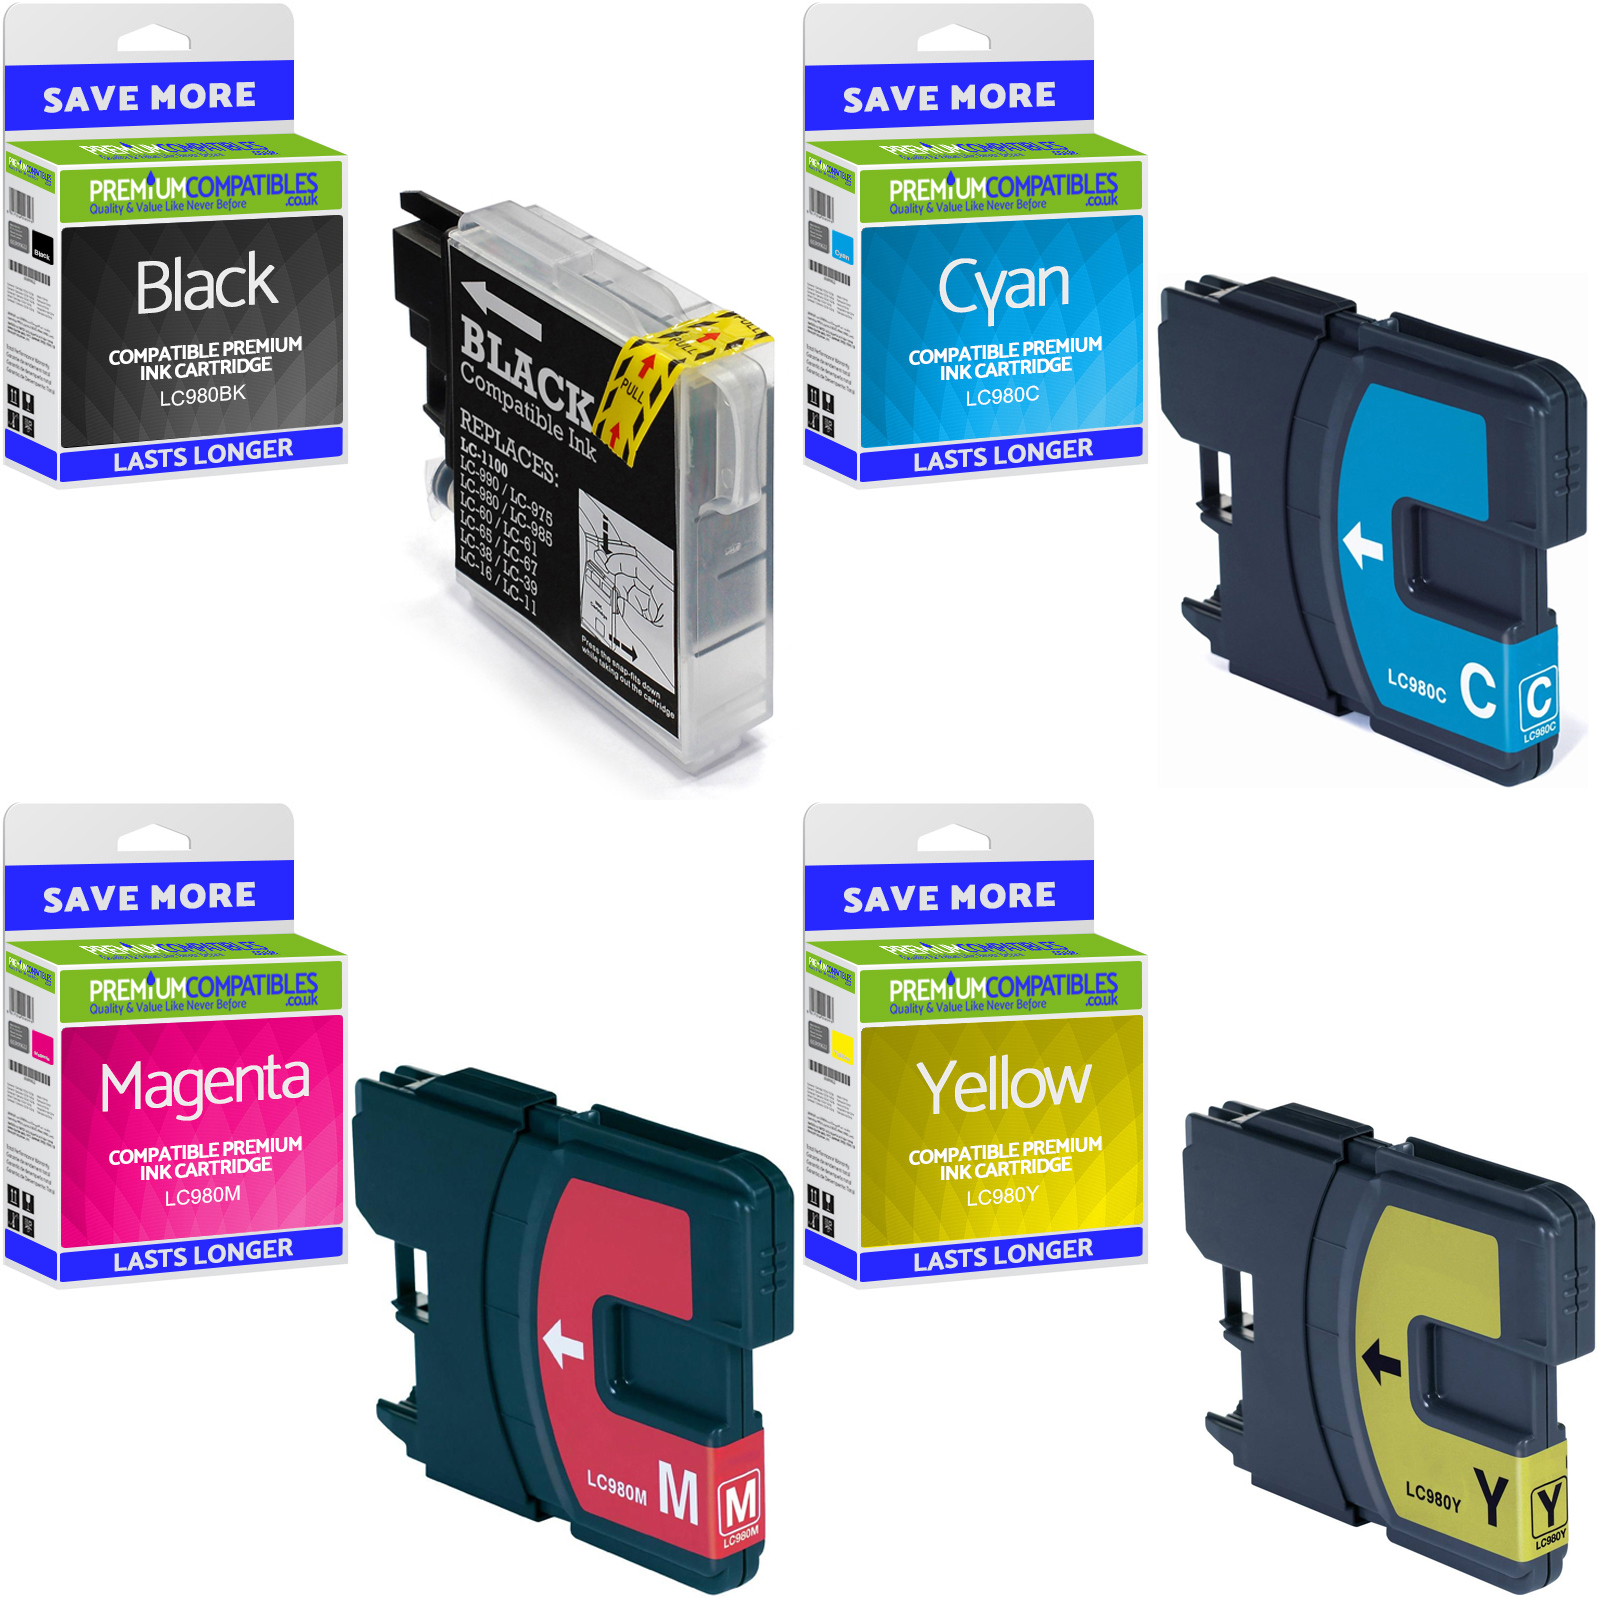 Compatible Brother LC980 CMYK Multipack Ink Cartridges (LC980VALBPRF)